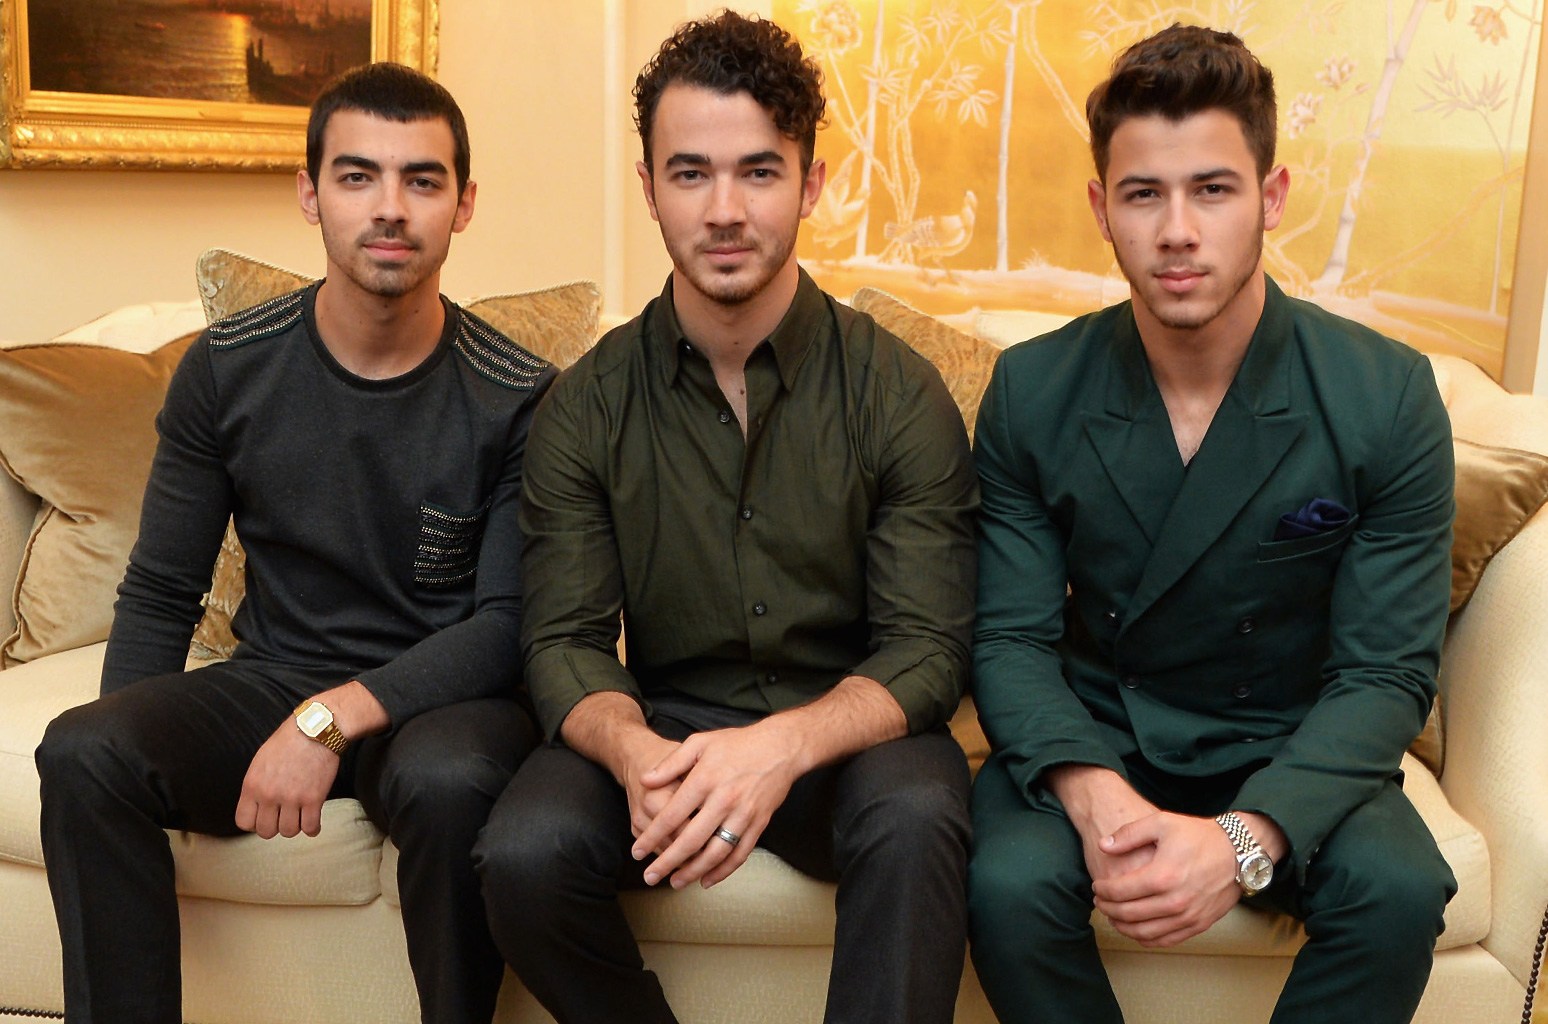 Sorry, But If You Weren’t Born After 1994 You’re Going to Fail This Quiz The Jonas Brothers